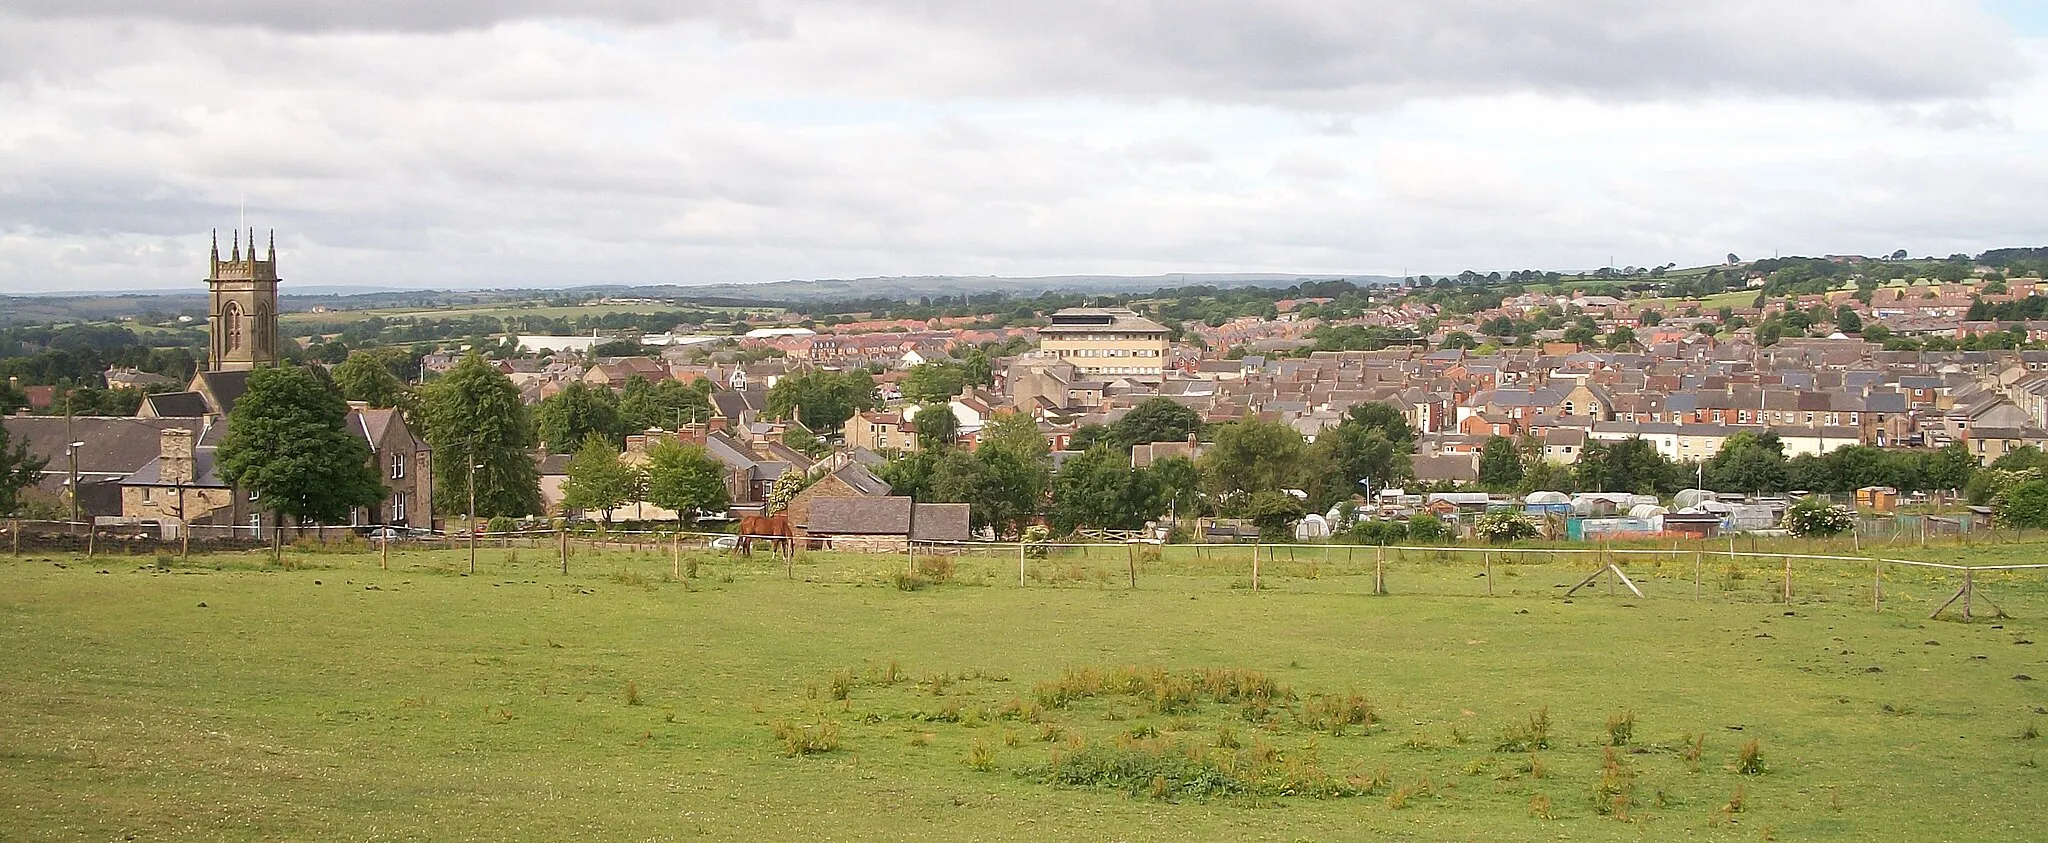 Photo showing: A view across Crook from Hole in the Wall Farm on Church Hill